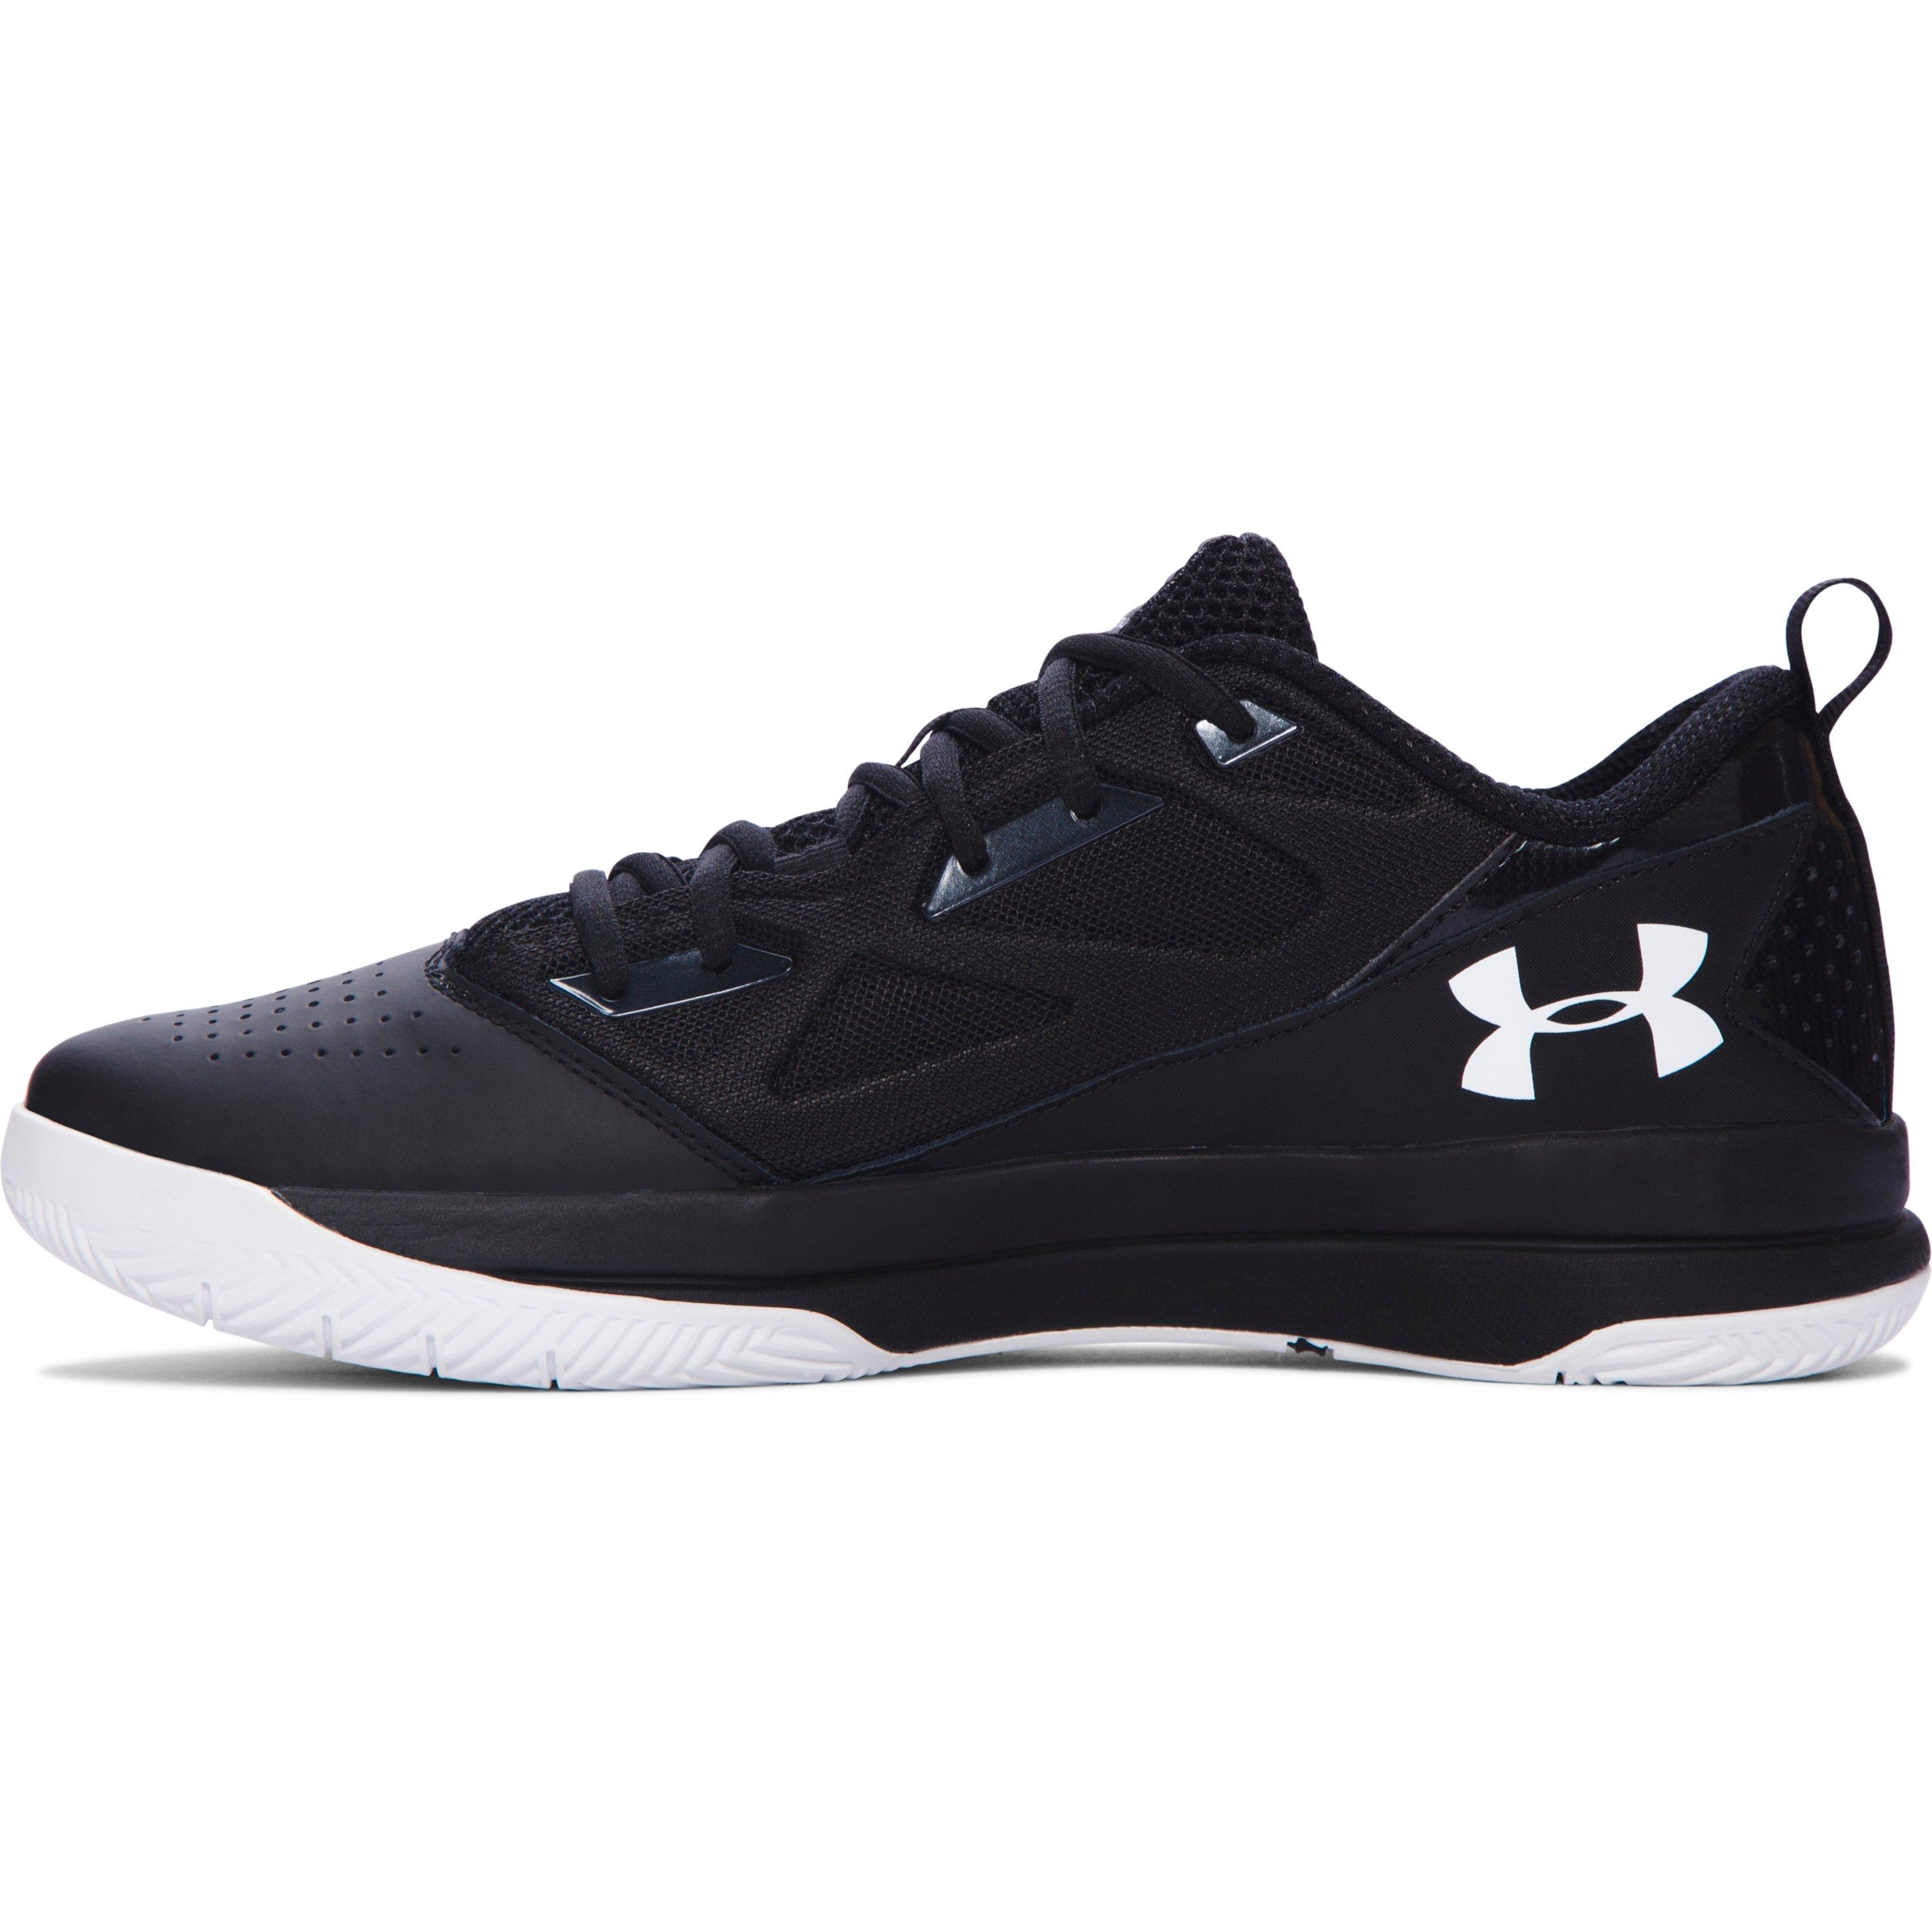 Under Armour Synthetic Men's Ua Jet Low Basketball Shoes in Black ...